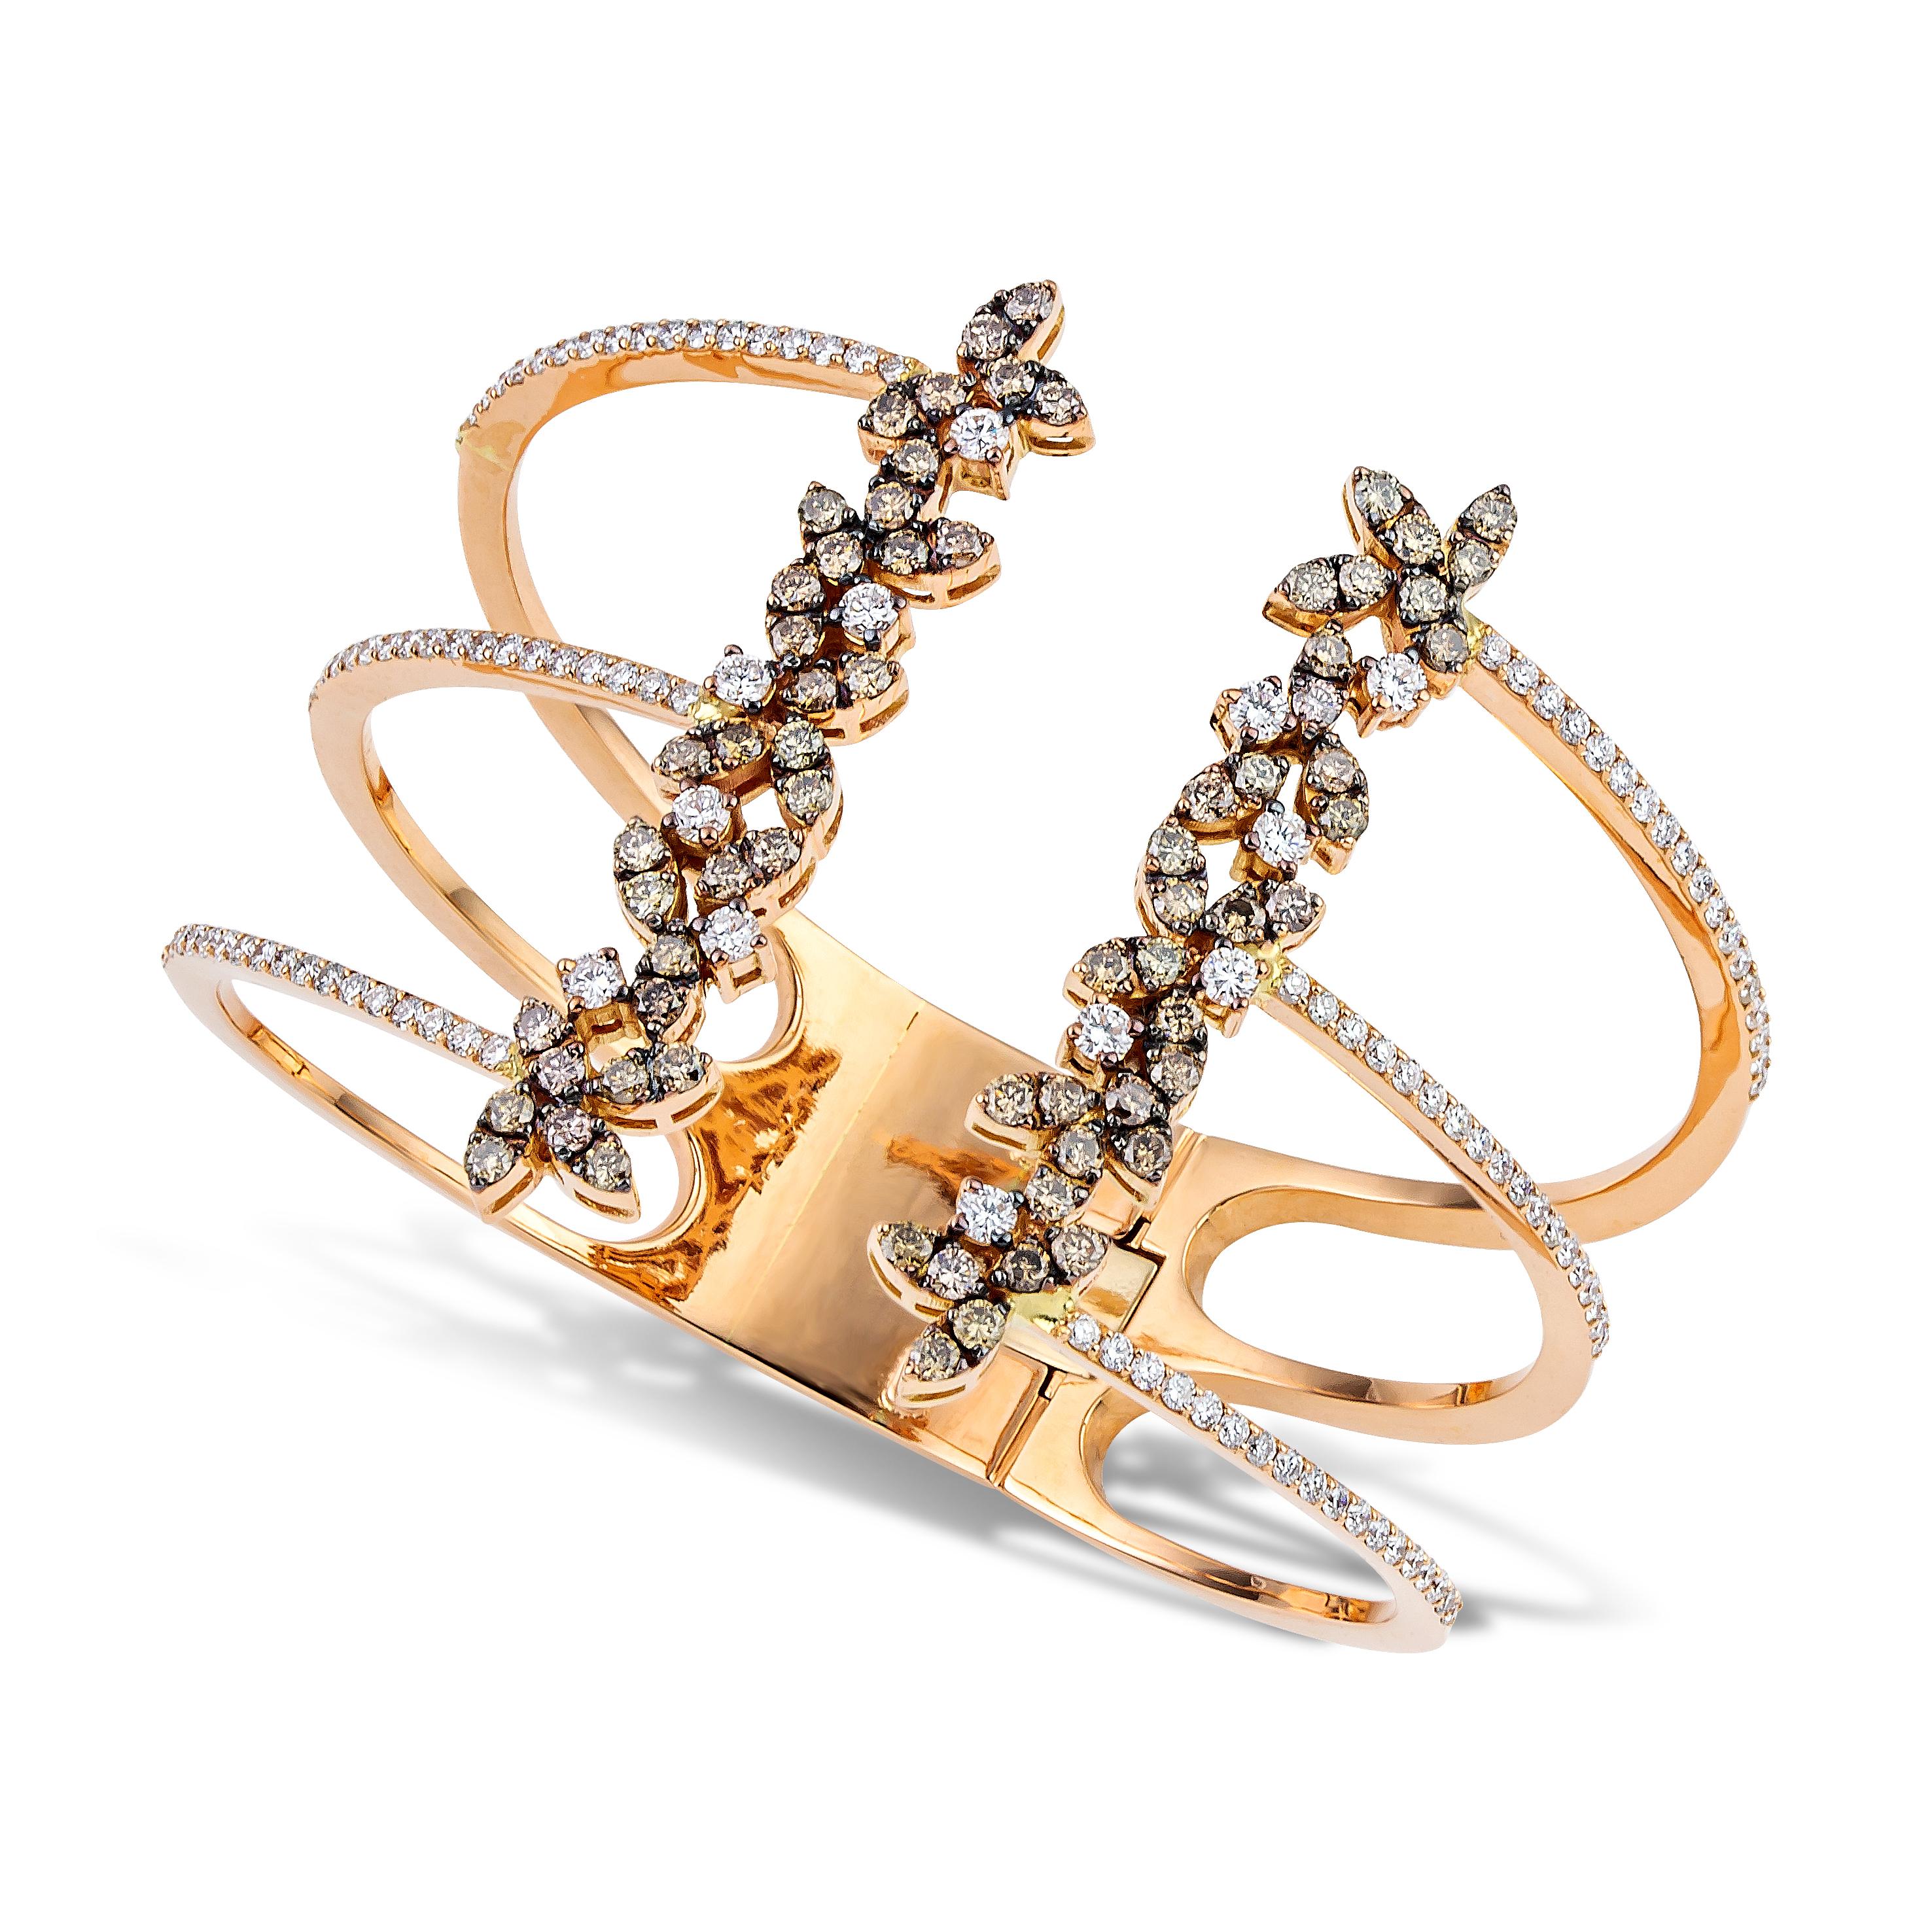 Unique cage cuff bracelet handcrafted in 18Kt rose gold, white and brown brilliant cut diamonds 6,72 carat create elegantly the shape of Lily flowers in bloom in the edges of the bracelet. Lines of pave diamonds in the shoulders of the bracelet,